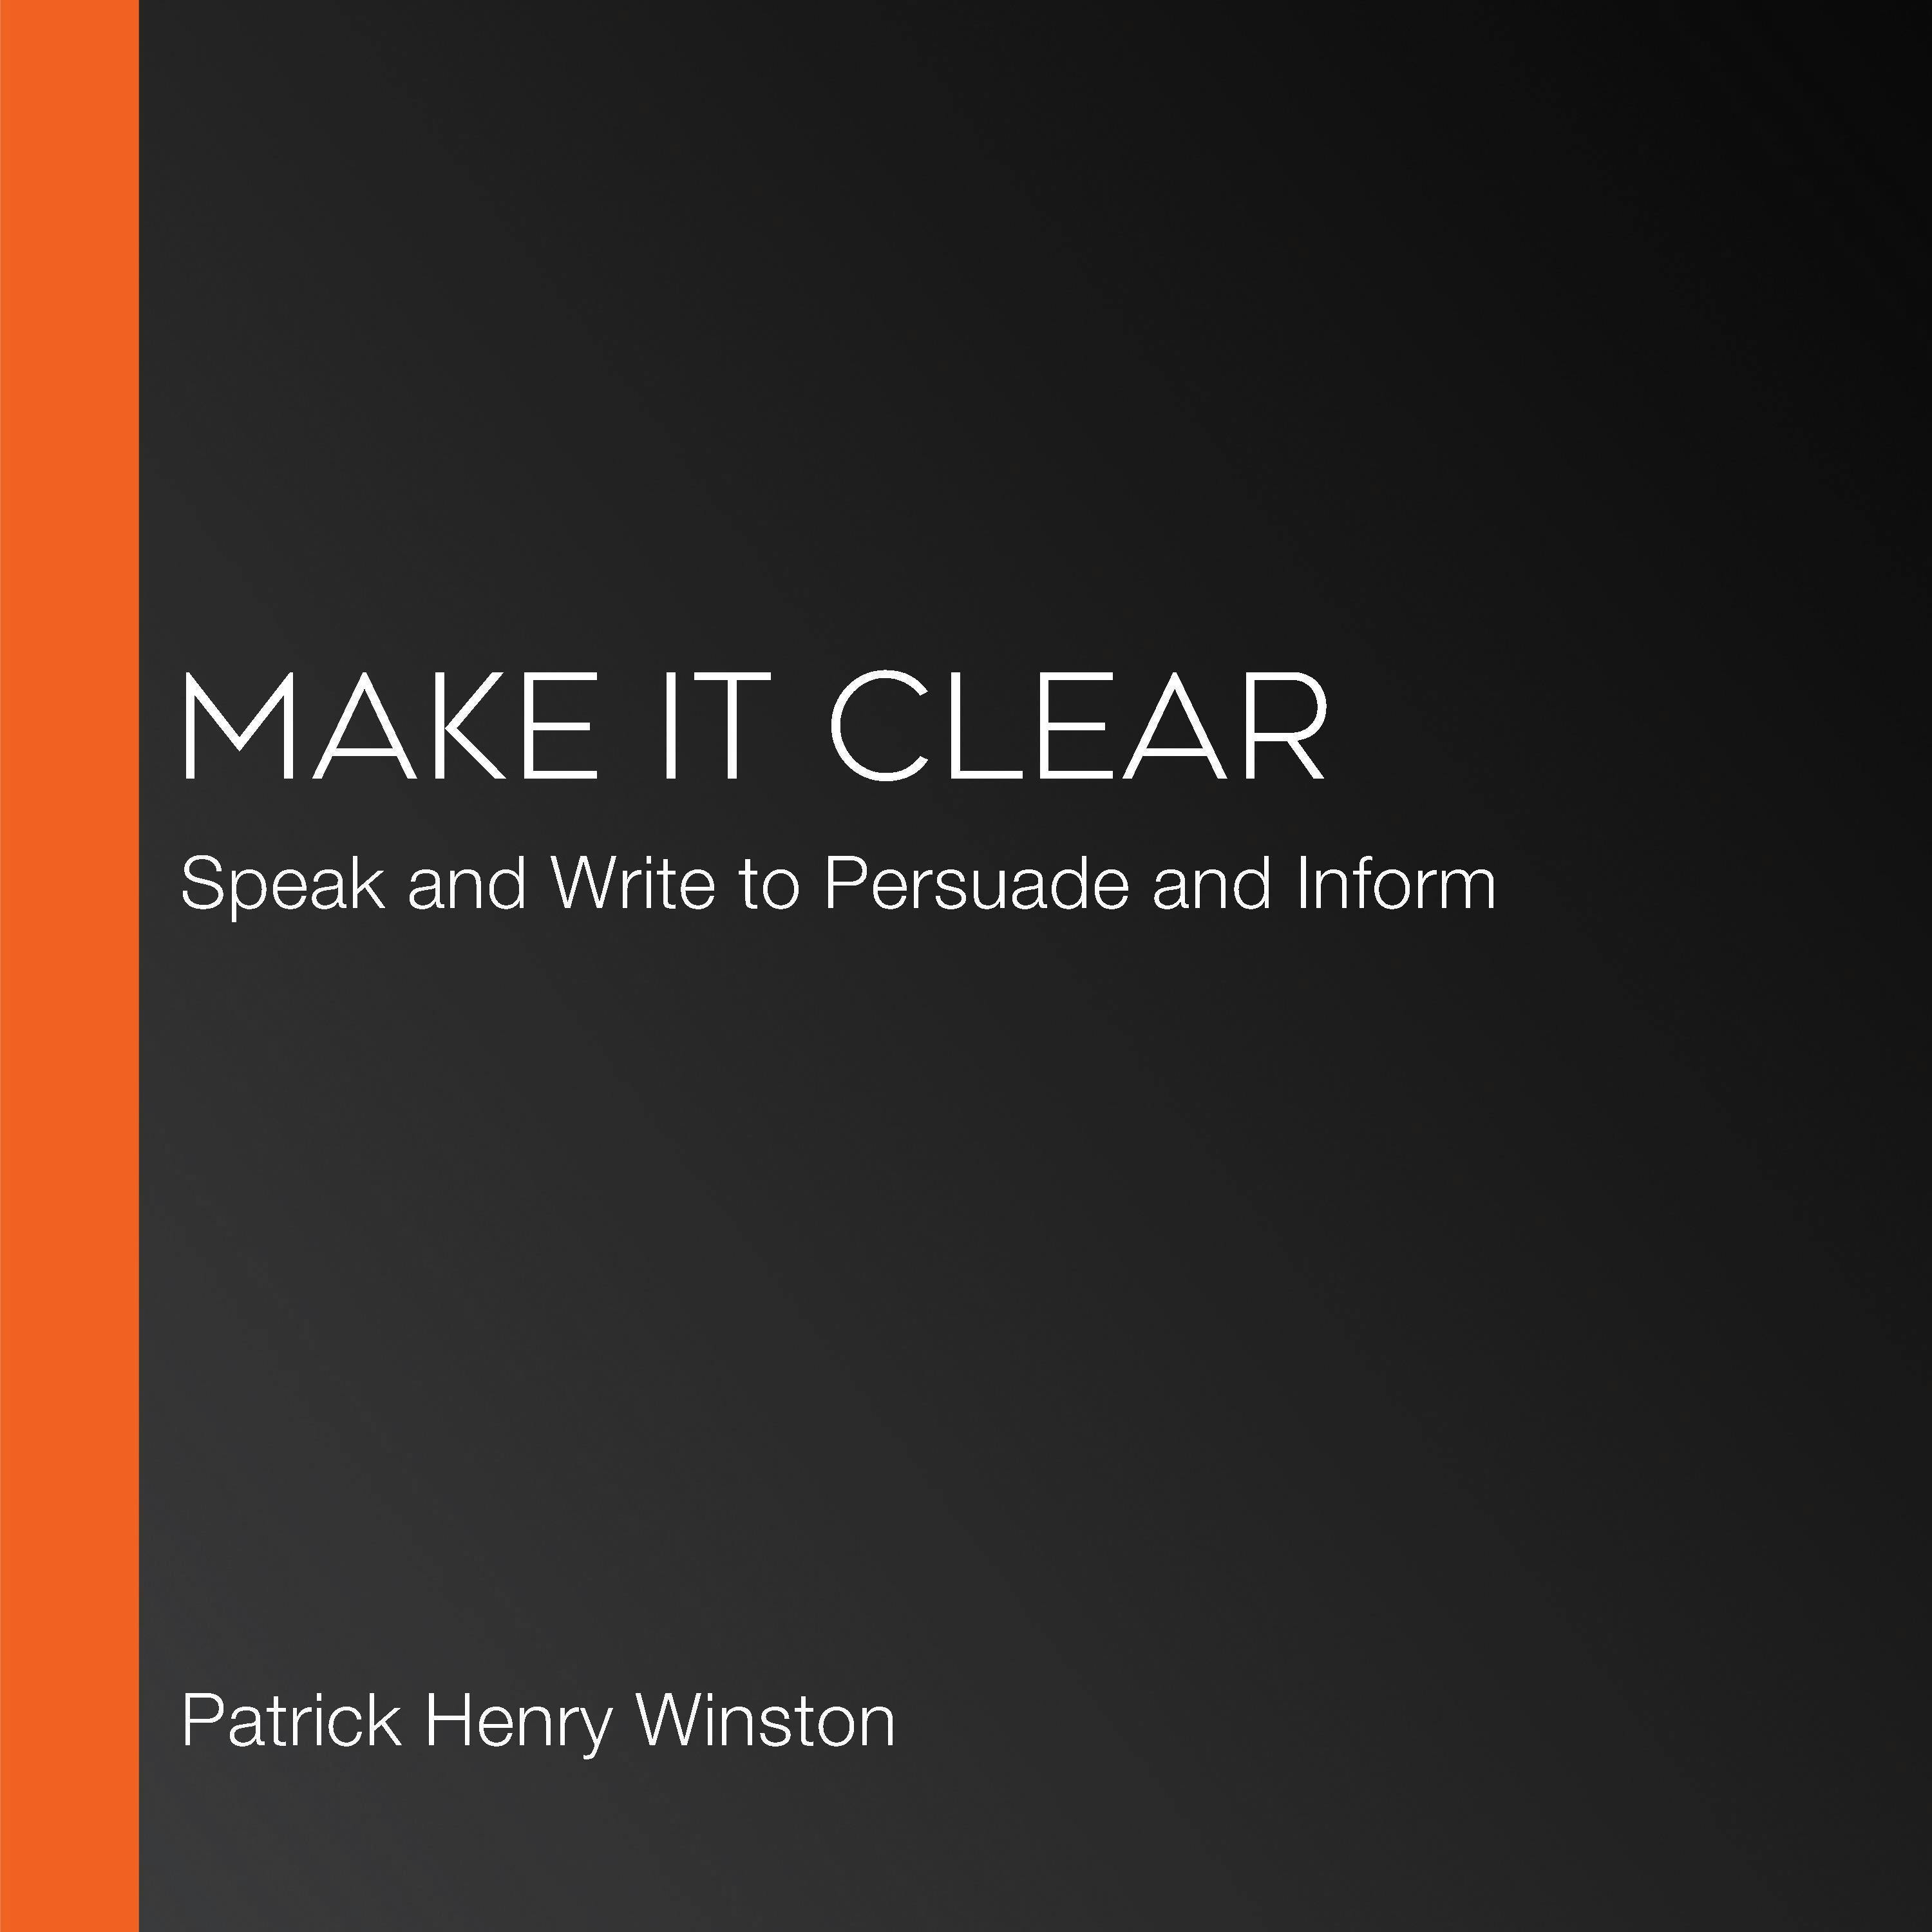 Make It Clear: Speak and Write to Persuade and Inform - Patrick Henry Winston